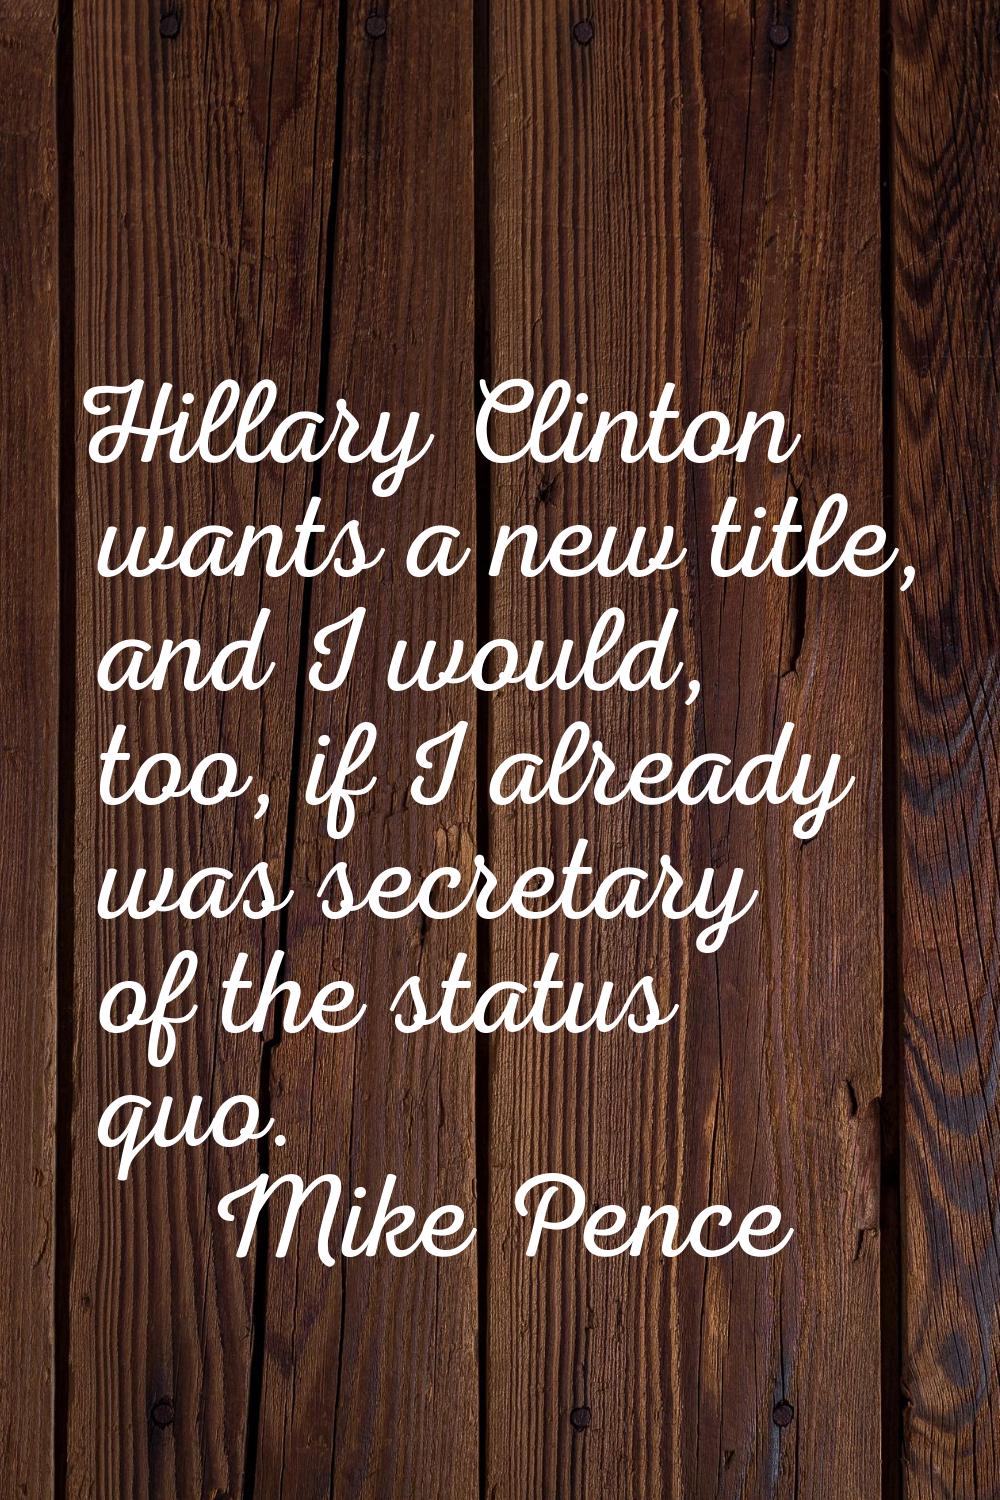 Hillary Clinton wants a new title, and I would, too, if I already was secretary of the status quo.